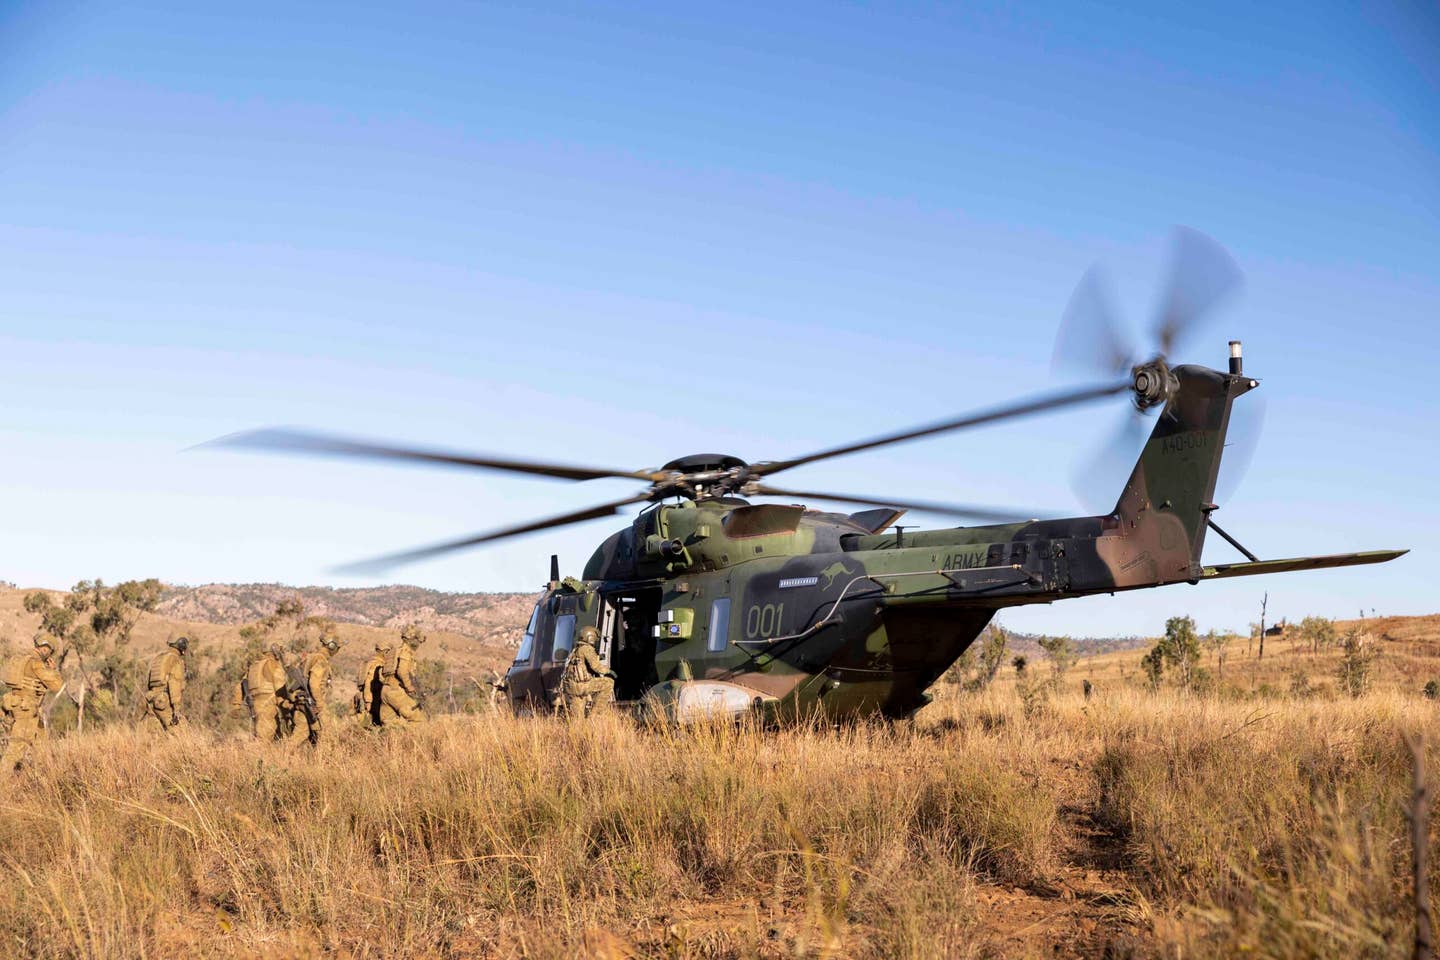 An Australian Army NH-90 Tactical Transport Helicopter conducts a casevac Aeromedical Evacuation exercise with Australian Army infantry during training in 2020. <em>Commonwealth of Australia, Department of Defense</em>